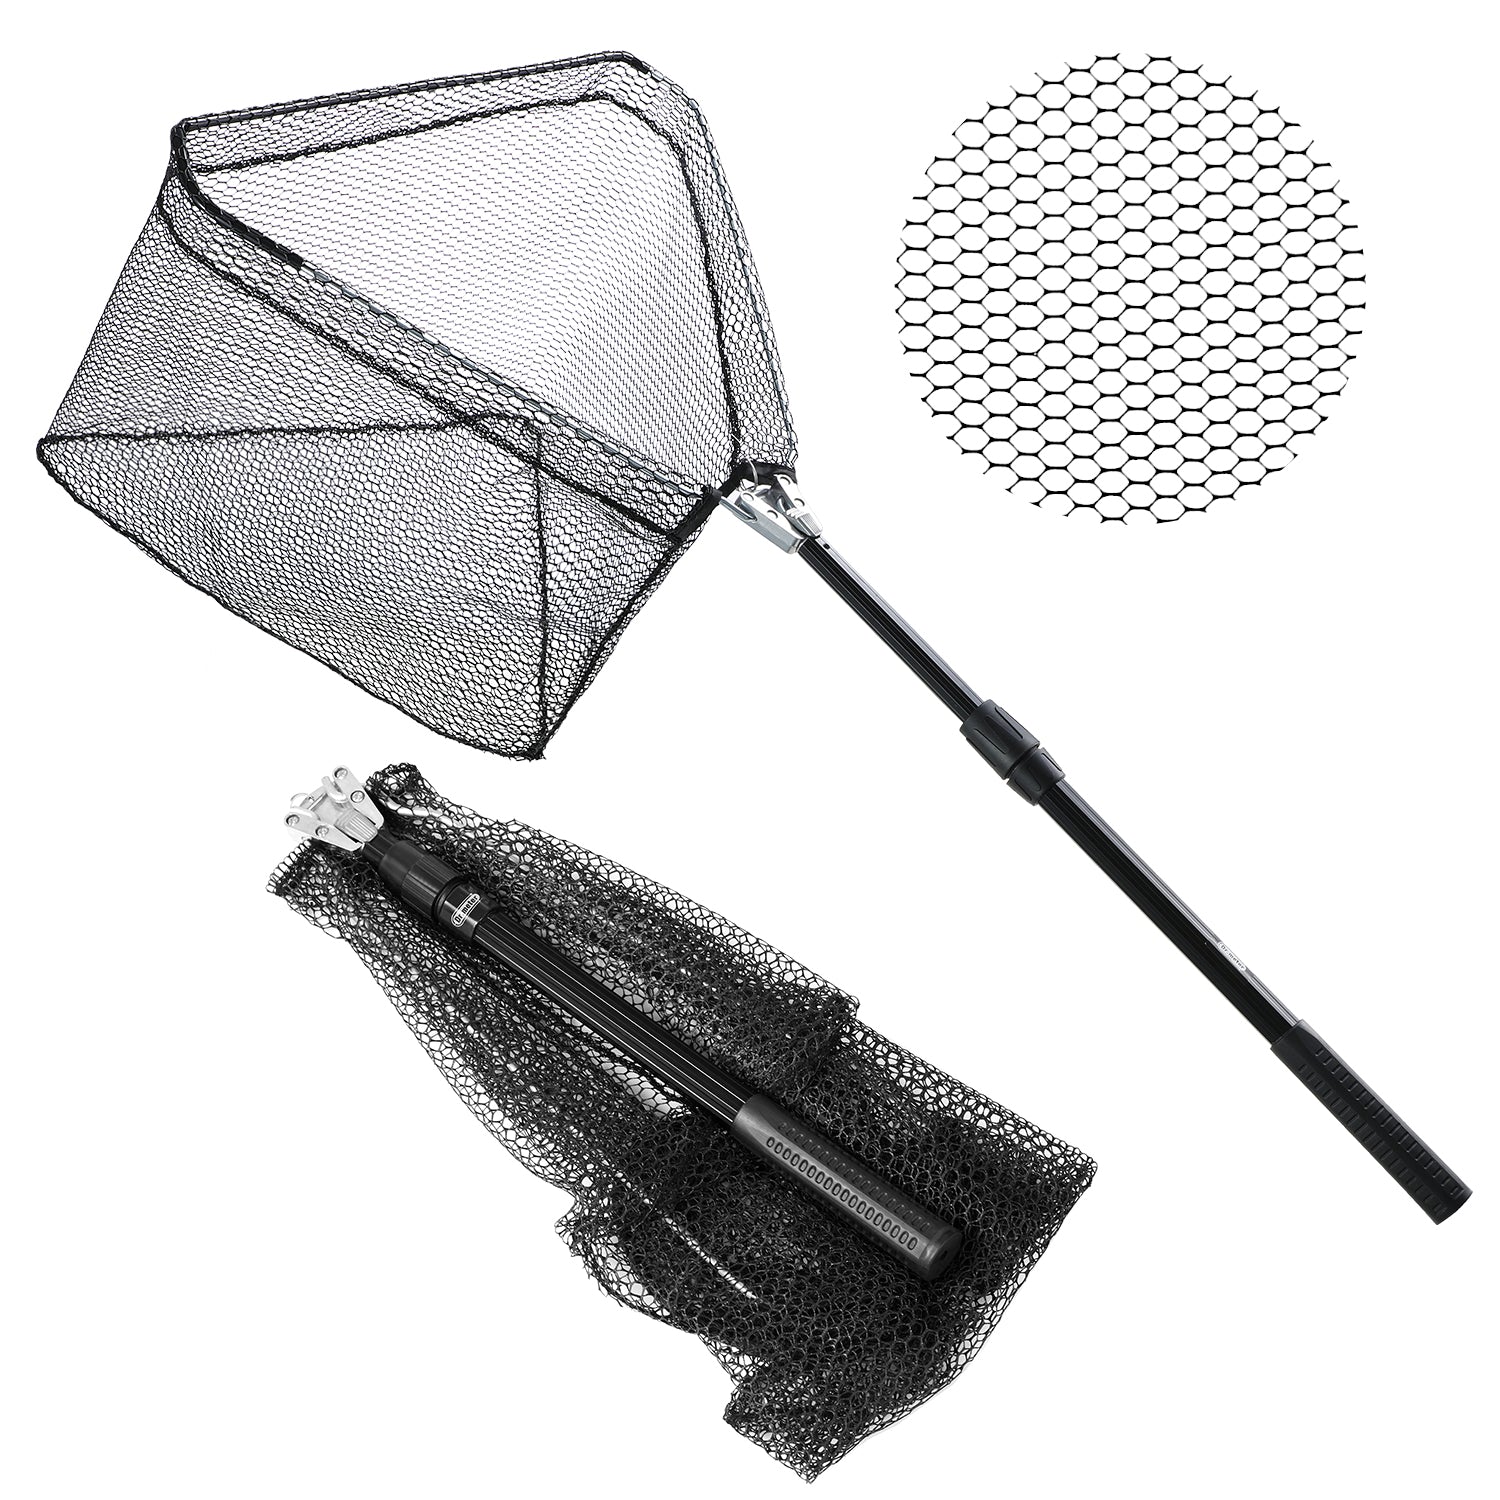 Fishing Net, Light Weight Portable Fish Landing Net with Telescopic Po –  Dr.meter